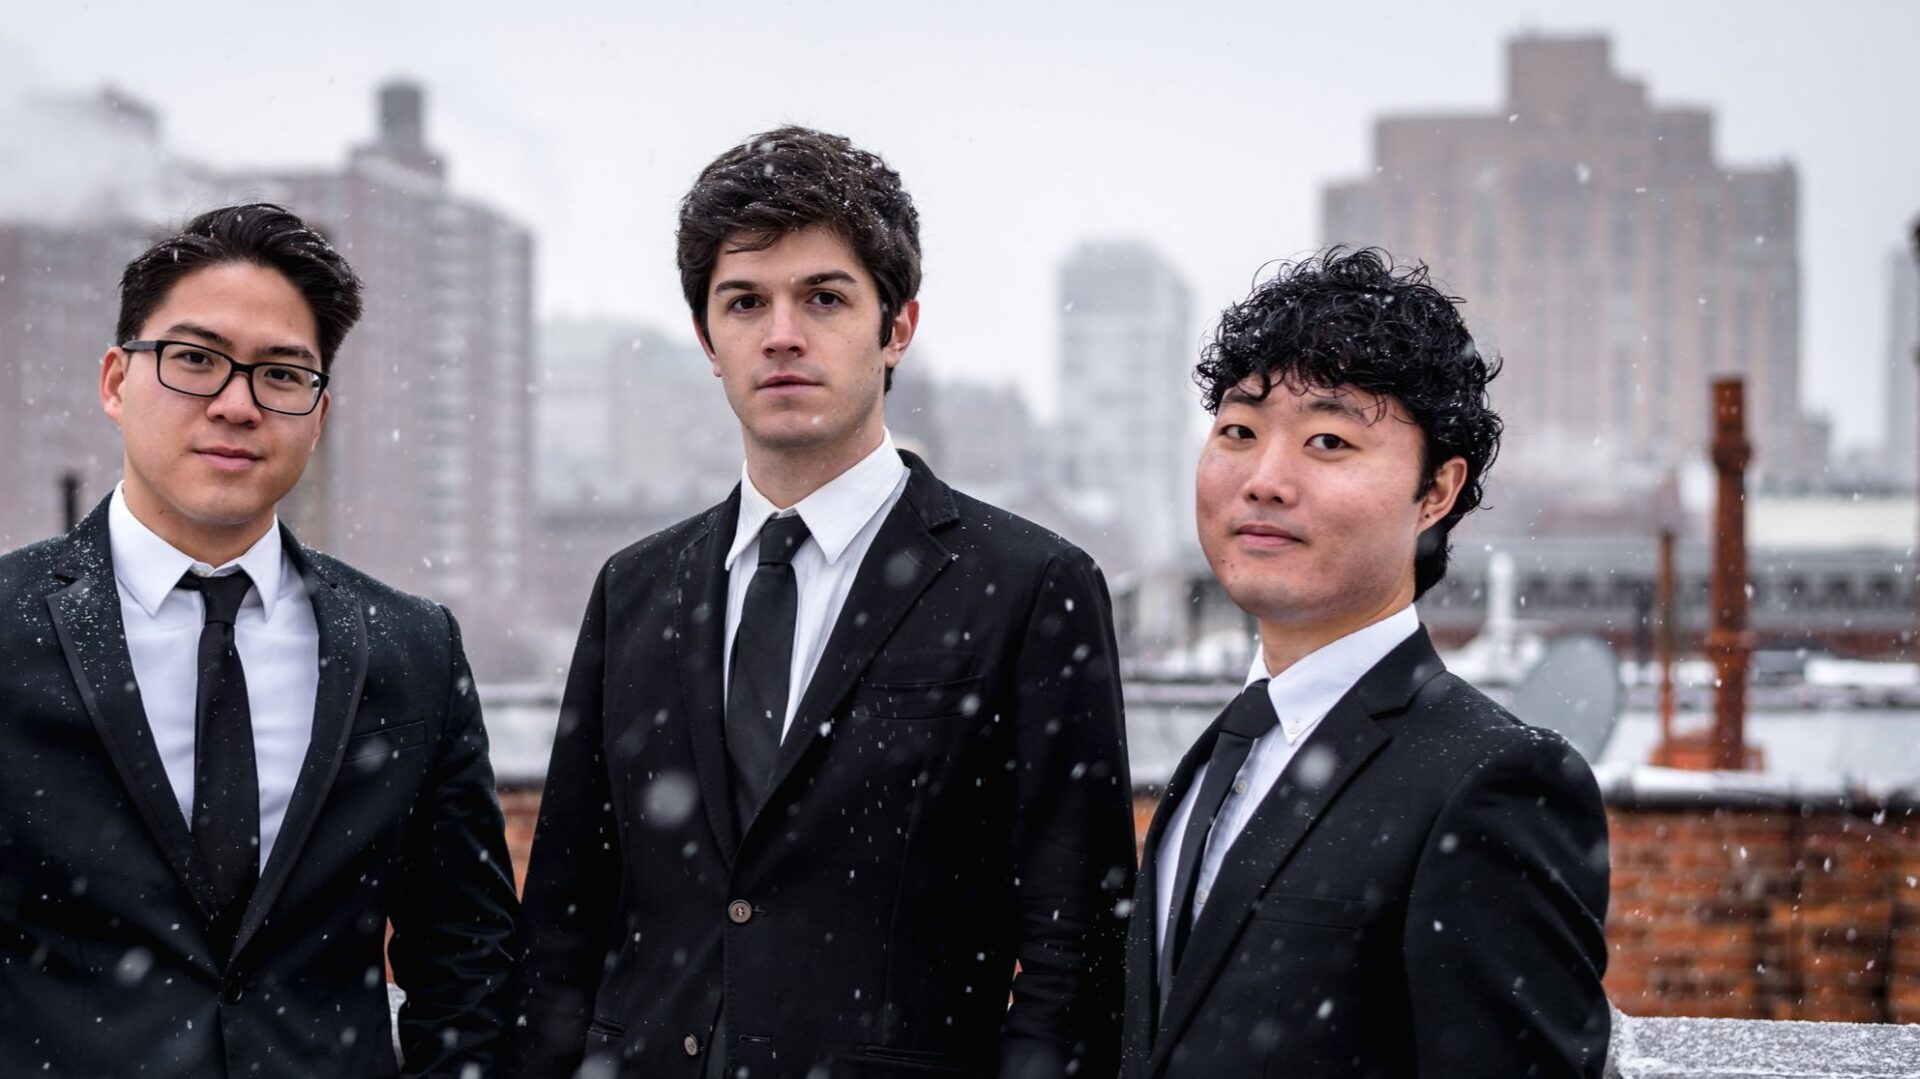 A picture of men wearing black suits in a snowy day